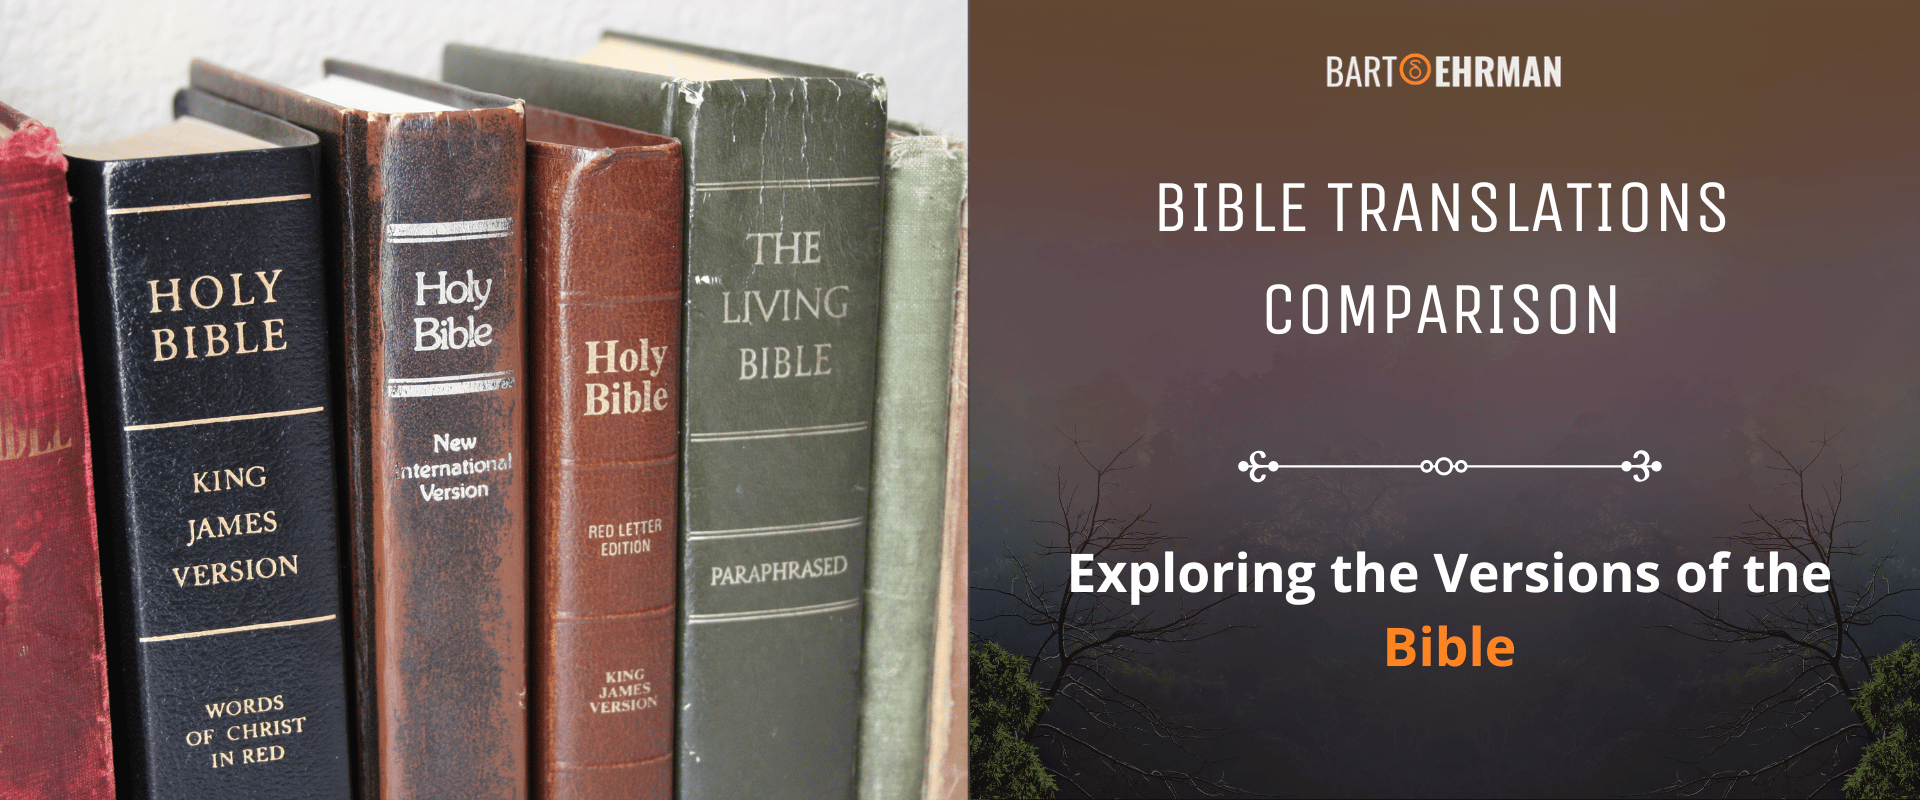 Bible Translations Comparison -Exploring the Versions of the Bible